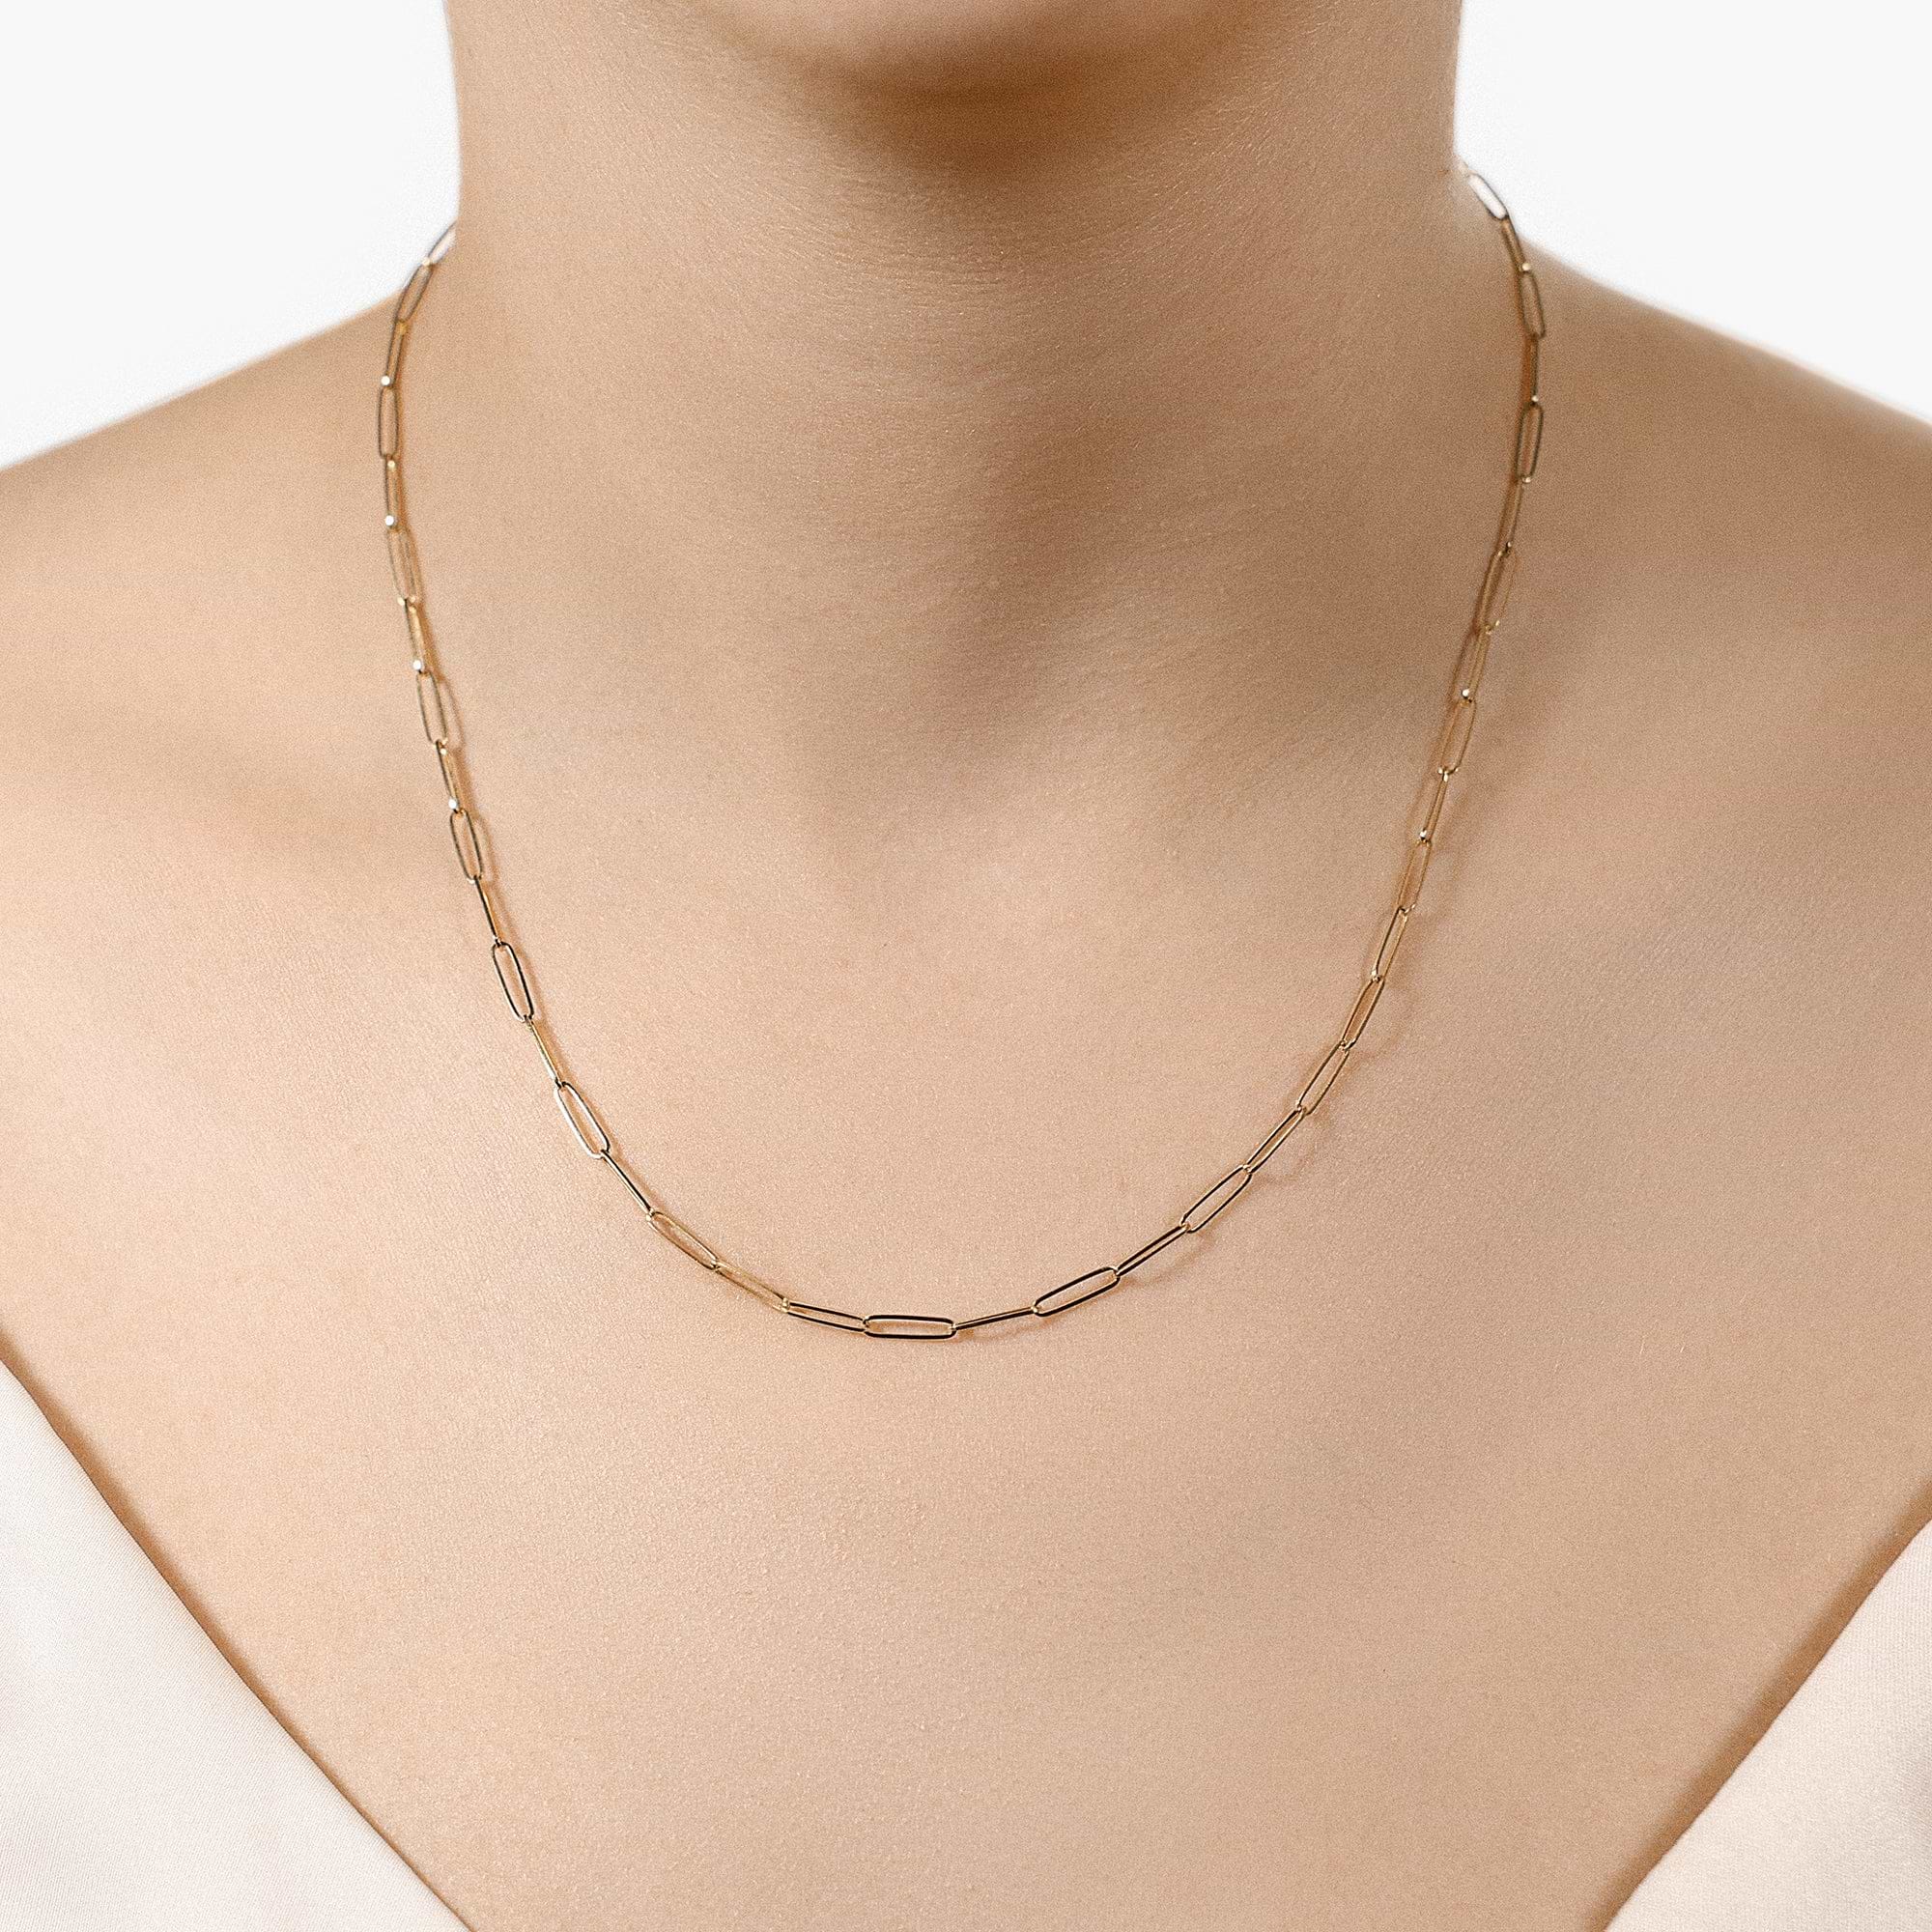 Paperclip Chain Necklace shown in 14K Yellow Gold|paperclip chain link necklace shown in 14k yellow gold 18 inch chain